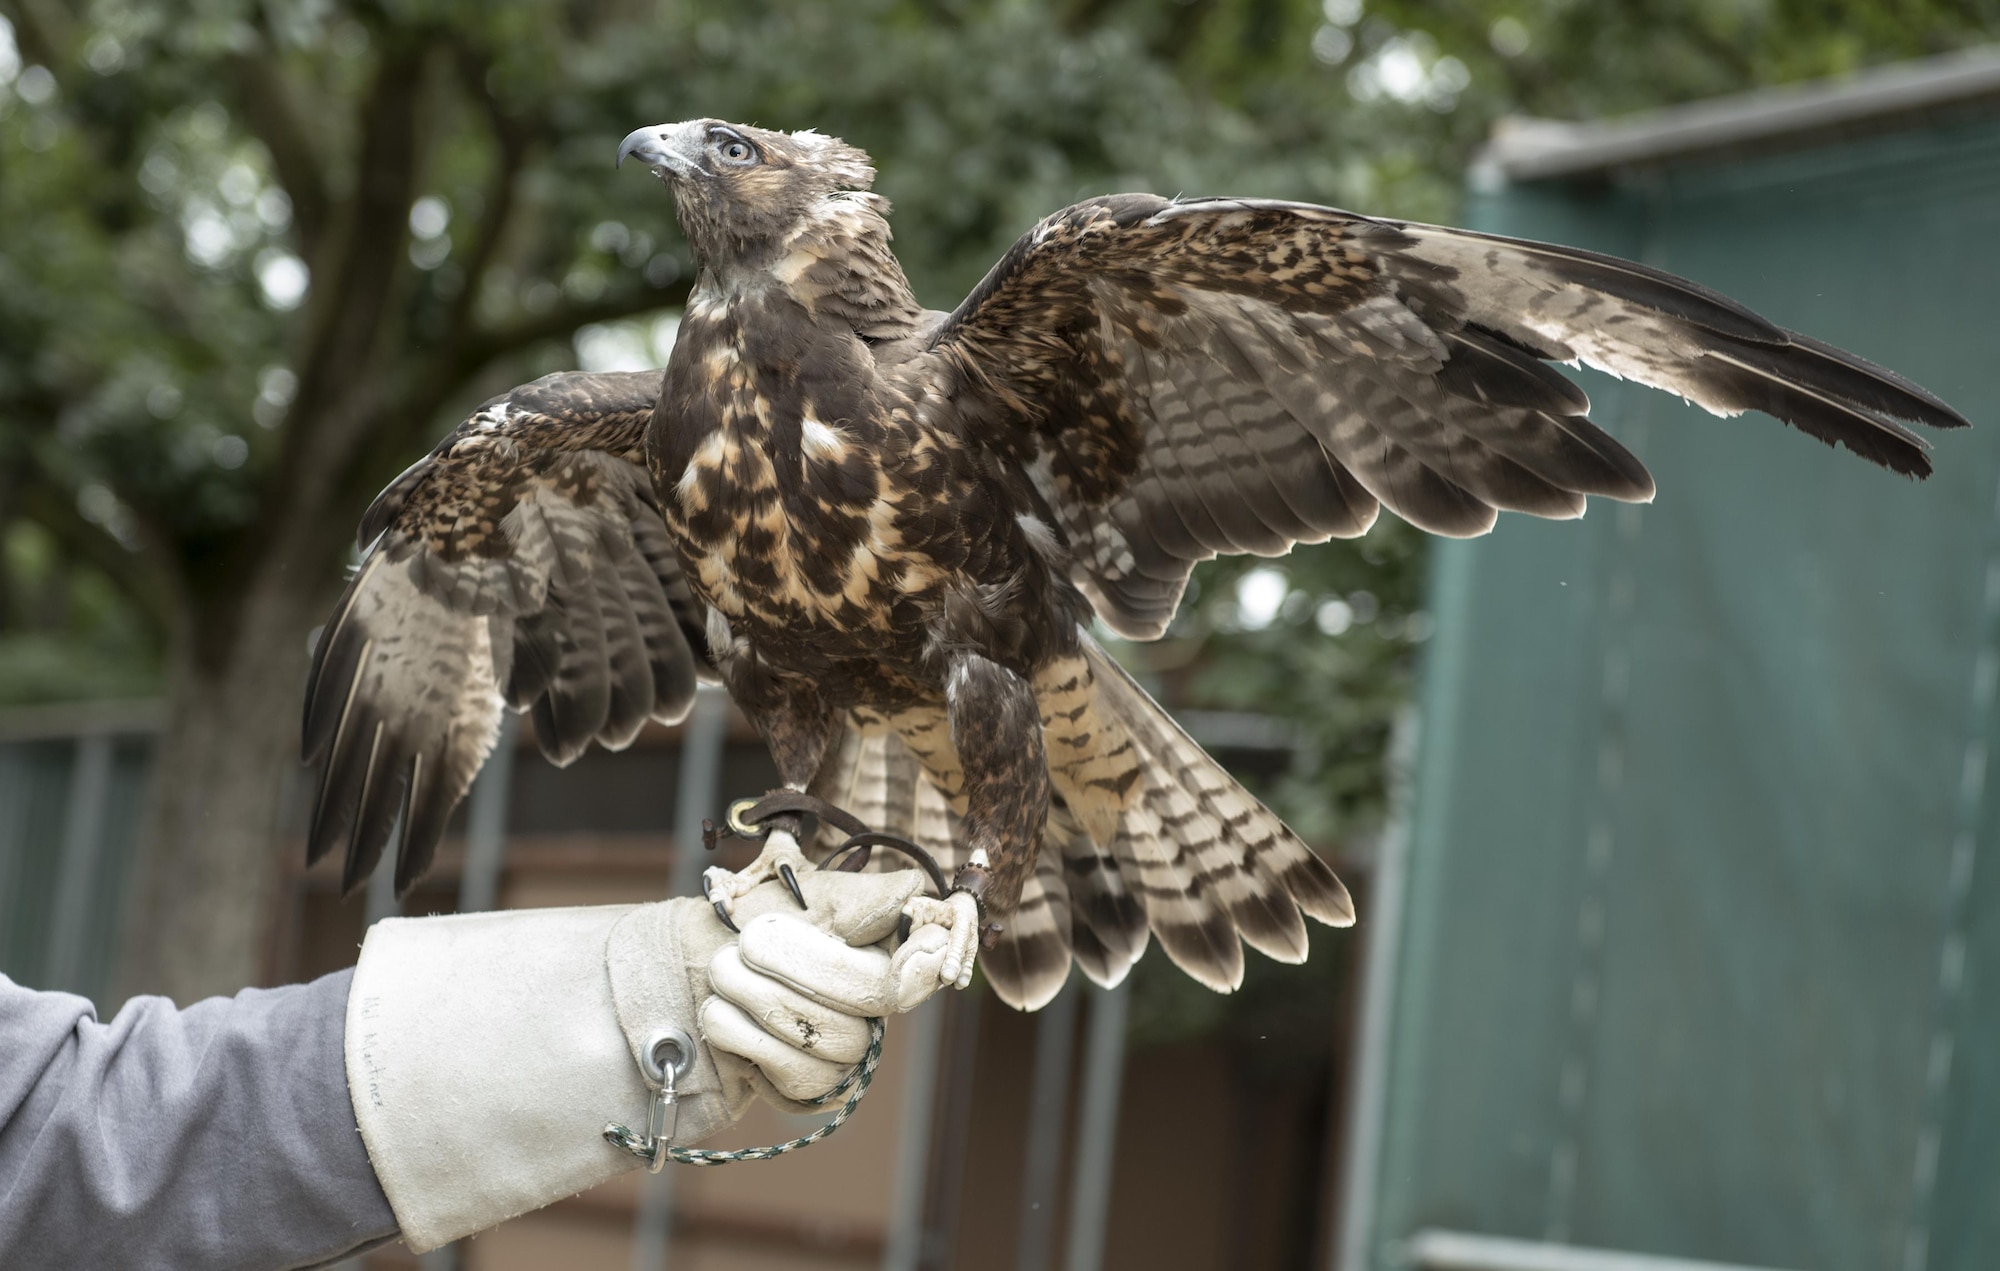 Whistler, a Swainson’s hawk, displays the intricate markings on the underside of its wings and tail, June 8 2017, California Raptor Center, University of California, Davis. The Swainson’s hawk is a regular visitor at Travis Air Force Base, Calif., often nesting on base. (U.S. Air Force photo/ Heide Couch)